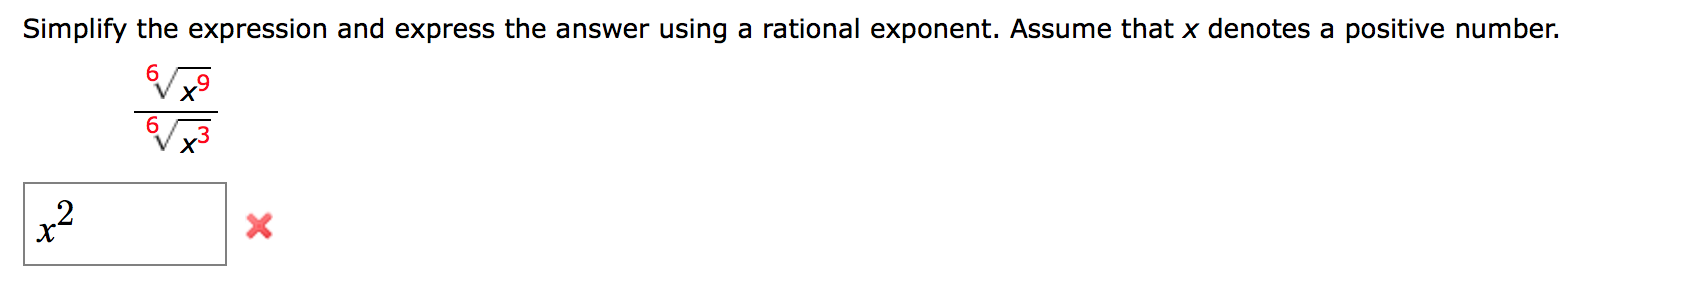 Simplify the expression and express the answer using a rational exponent. Assume that x denotes a positive number.
